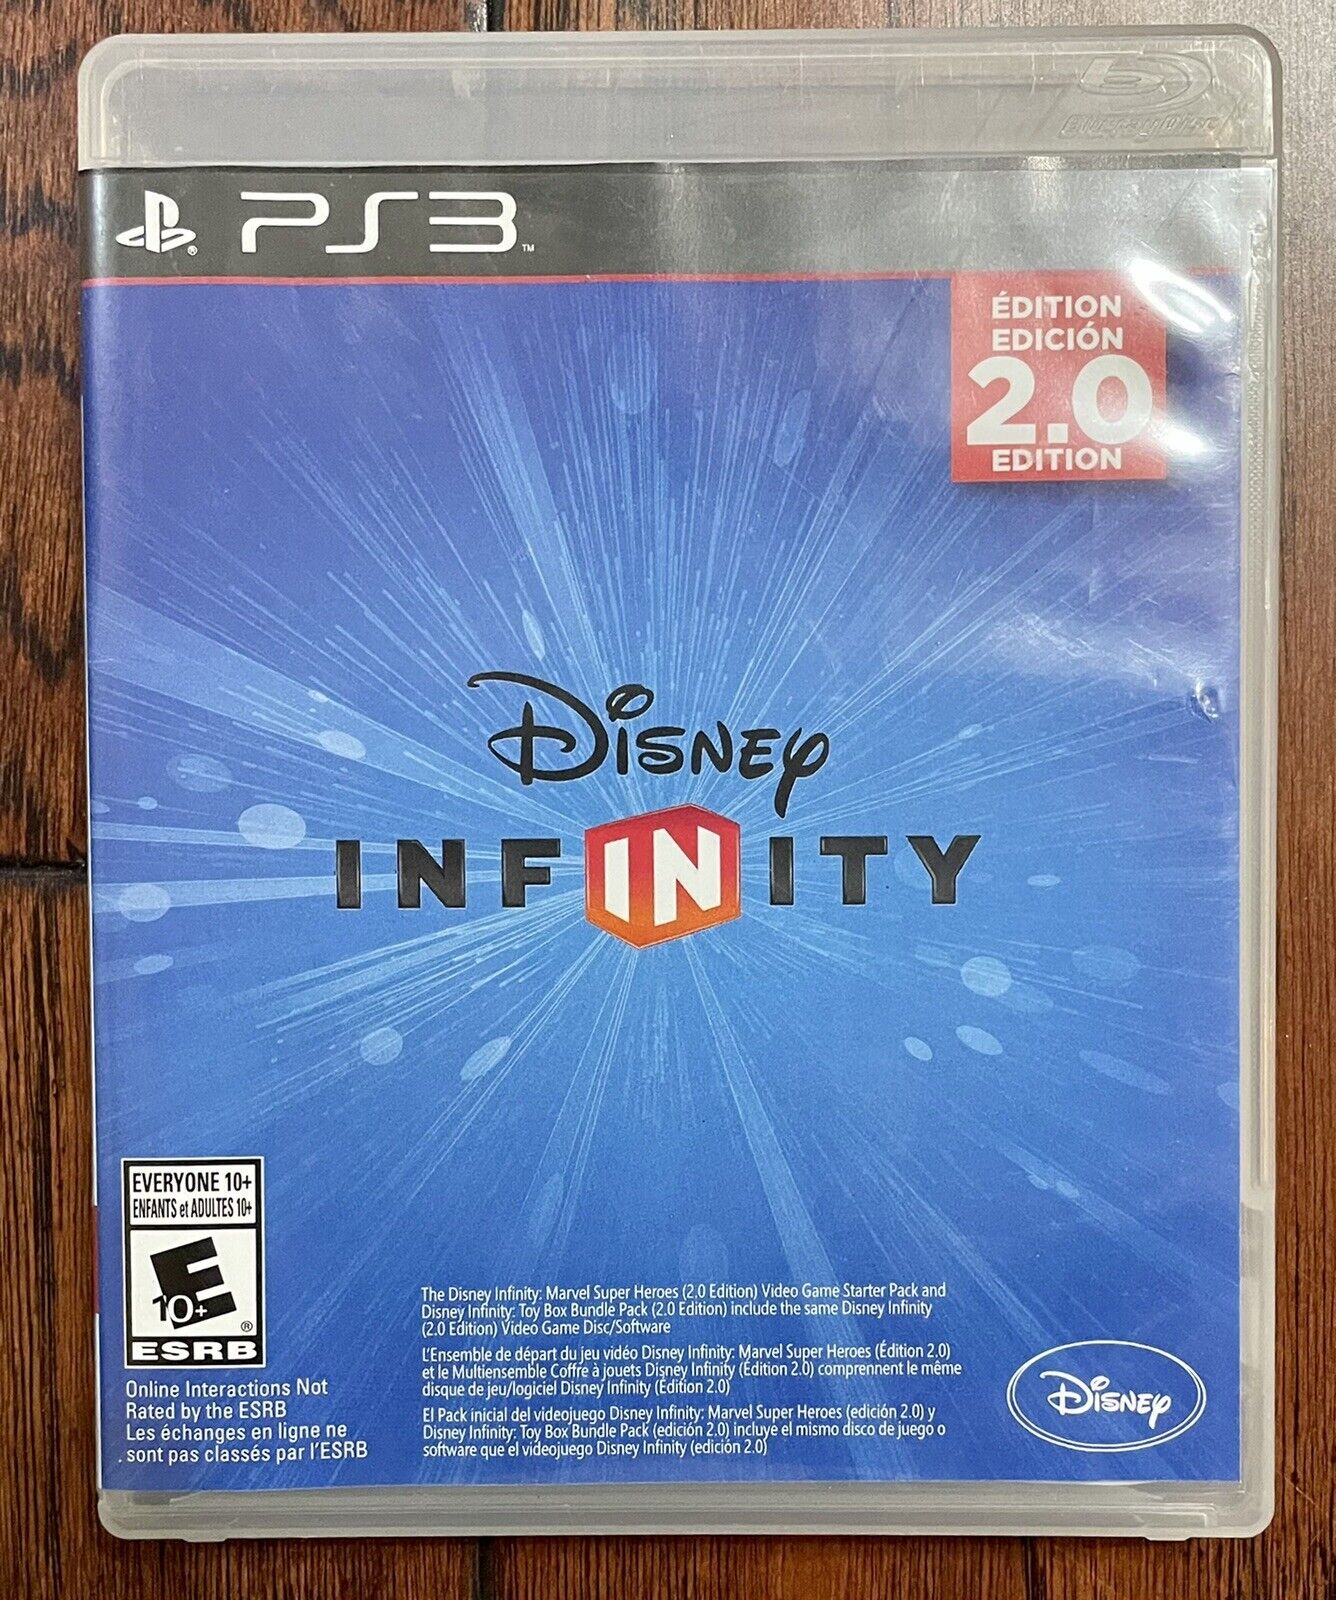 Host of rich Say aside Disney Infinity 2.0 With Manual Sony PlayStation 3 PS3 Video Game | eBay